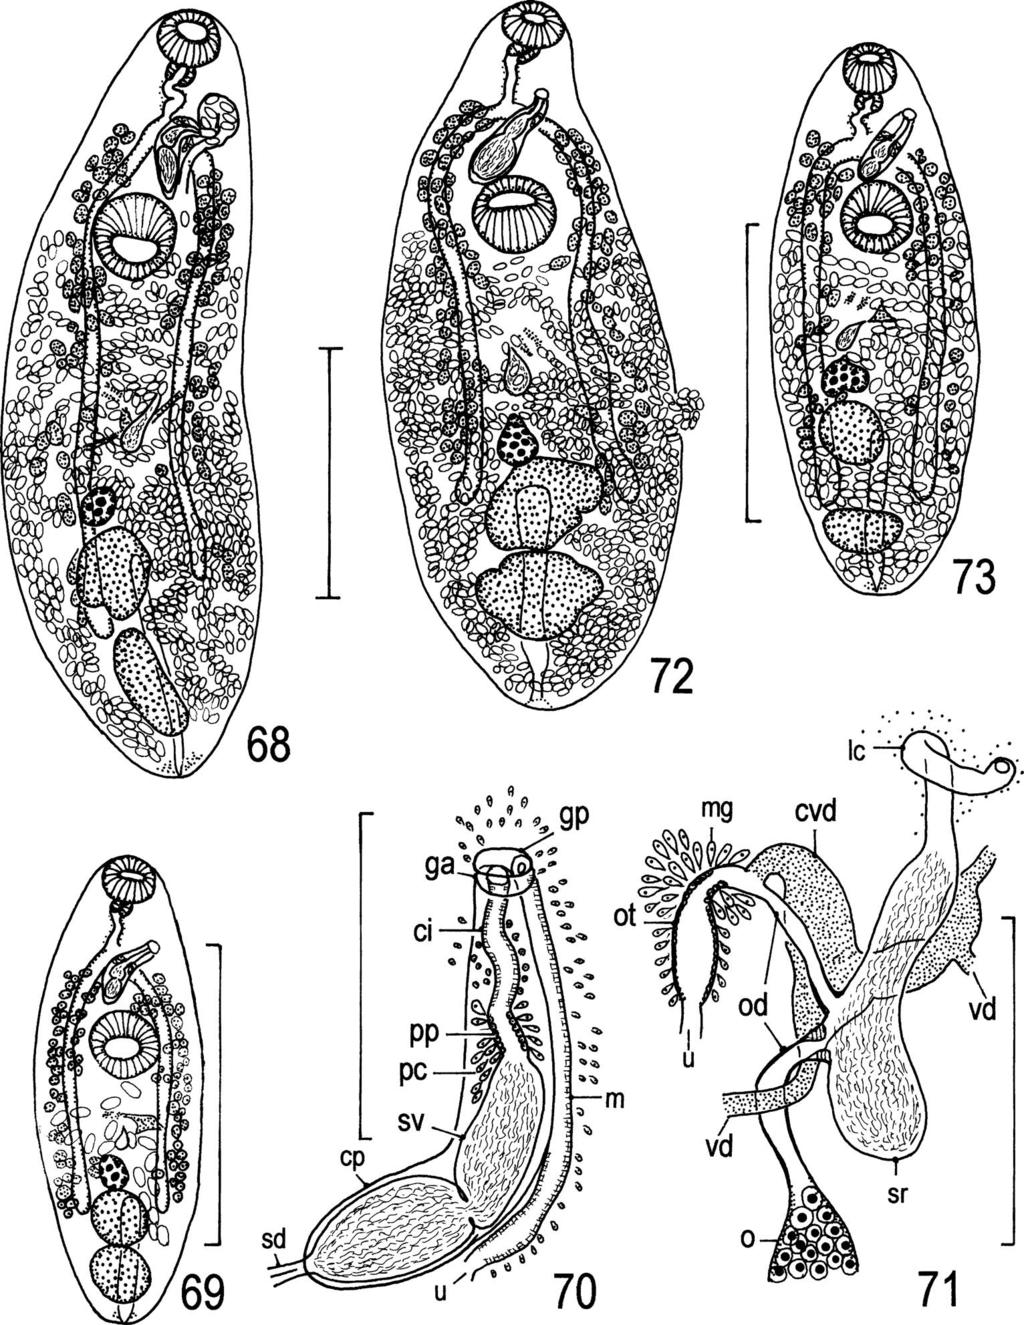 Digeneans (Trematoda) Parasitic in Freshwater Fishes (Osteichthyes) of the Lake Biwa Basin in Shiga 53 Figs. 68 73. Urorchis acheilognathi. Adult specimens.